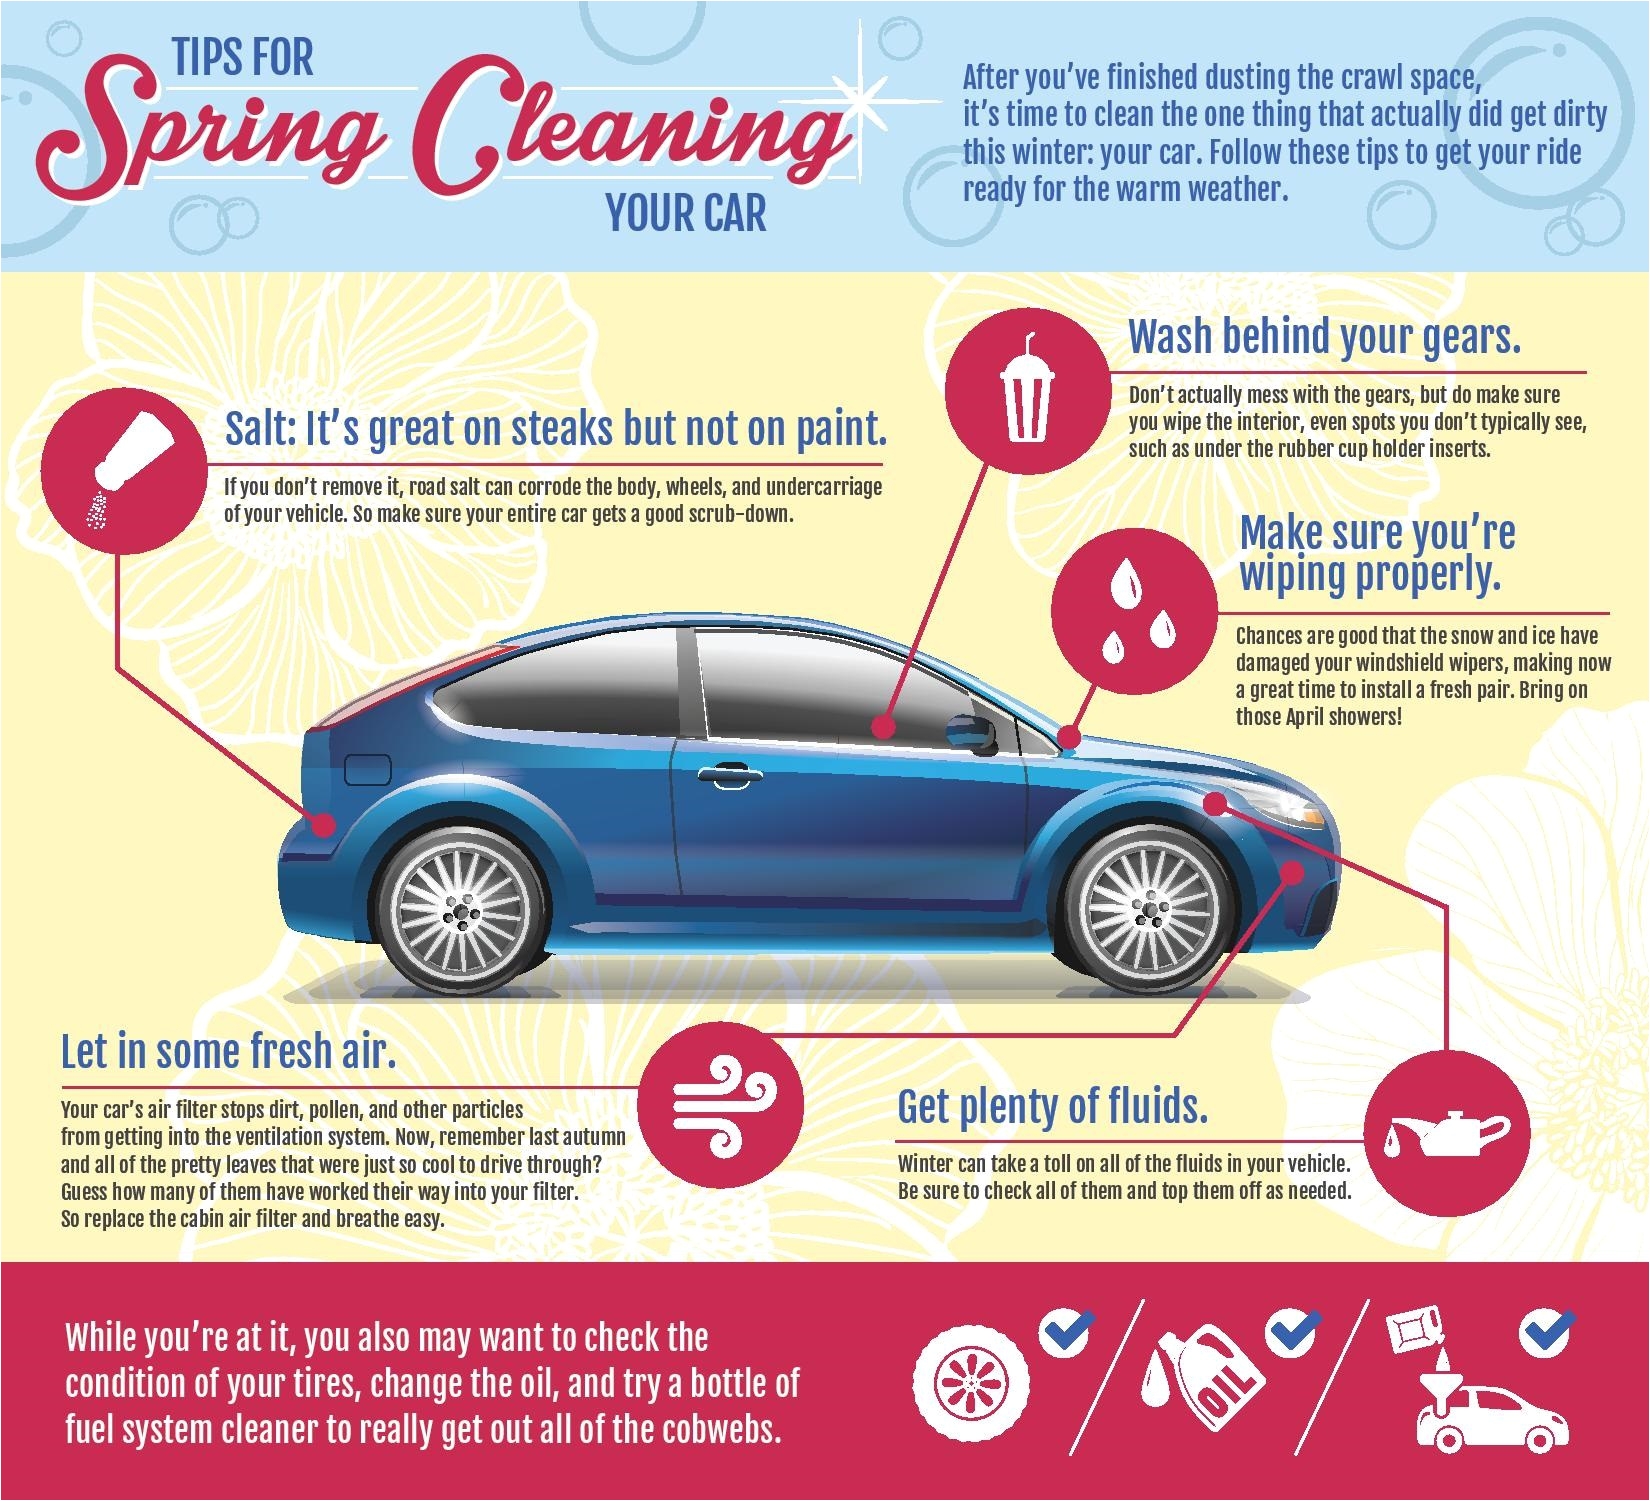 tips for spring cleaning your car